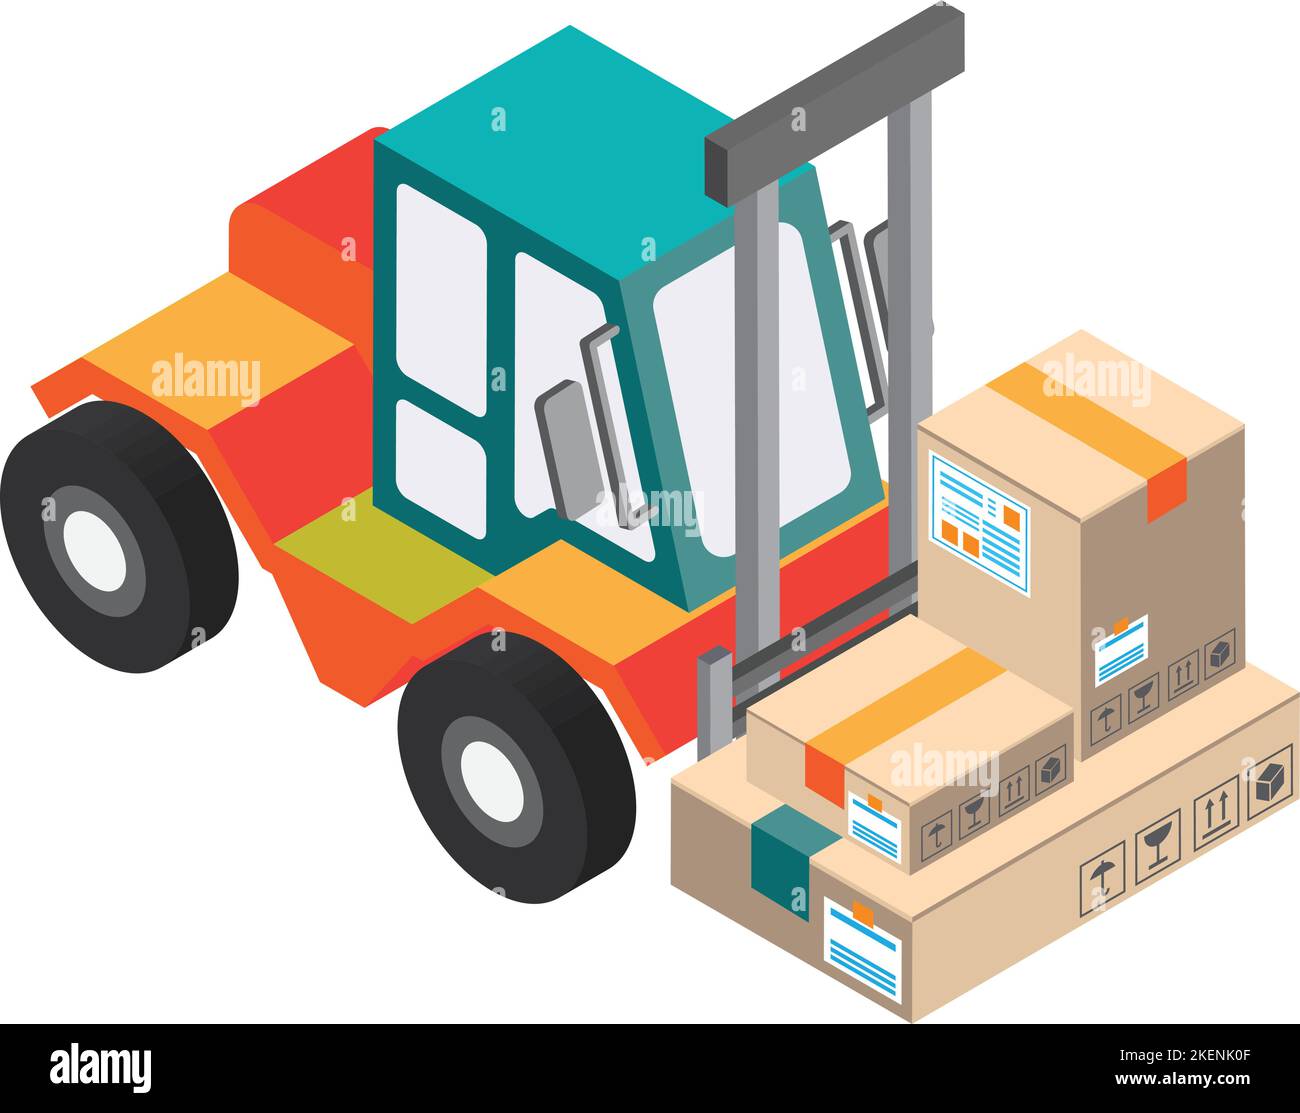 forklift machine illustration in 3D isometric style isolated on background Stock Vector